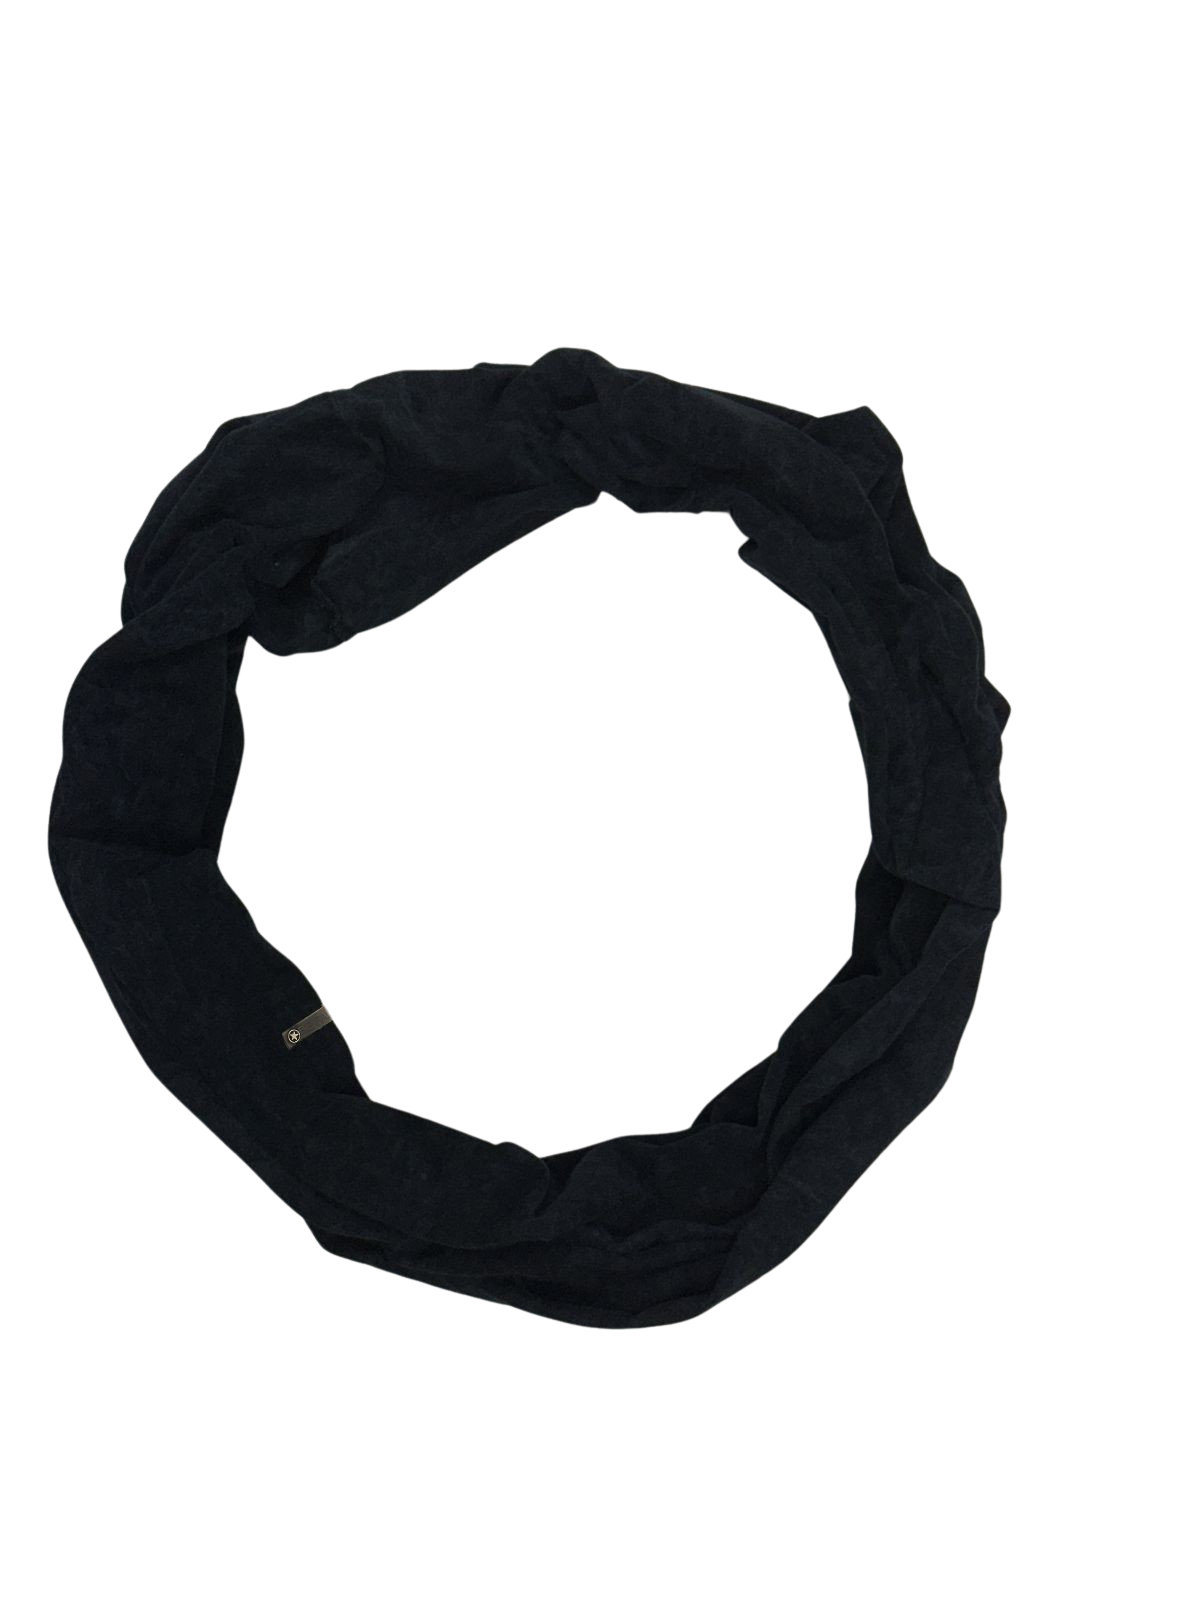 Be Famous Jersey Cotton Washed Loop Scarf (doppelt)  SV04W Black Wash